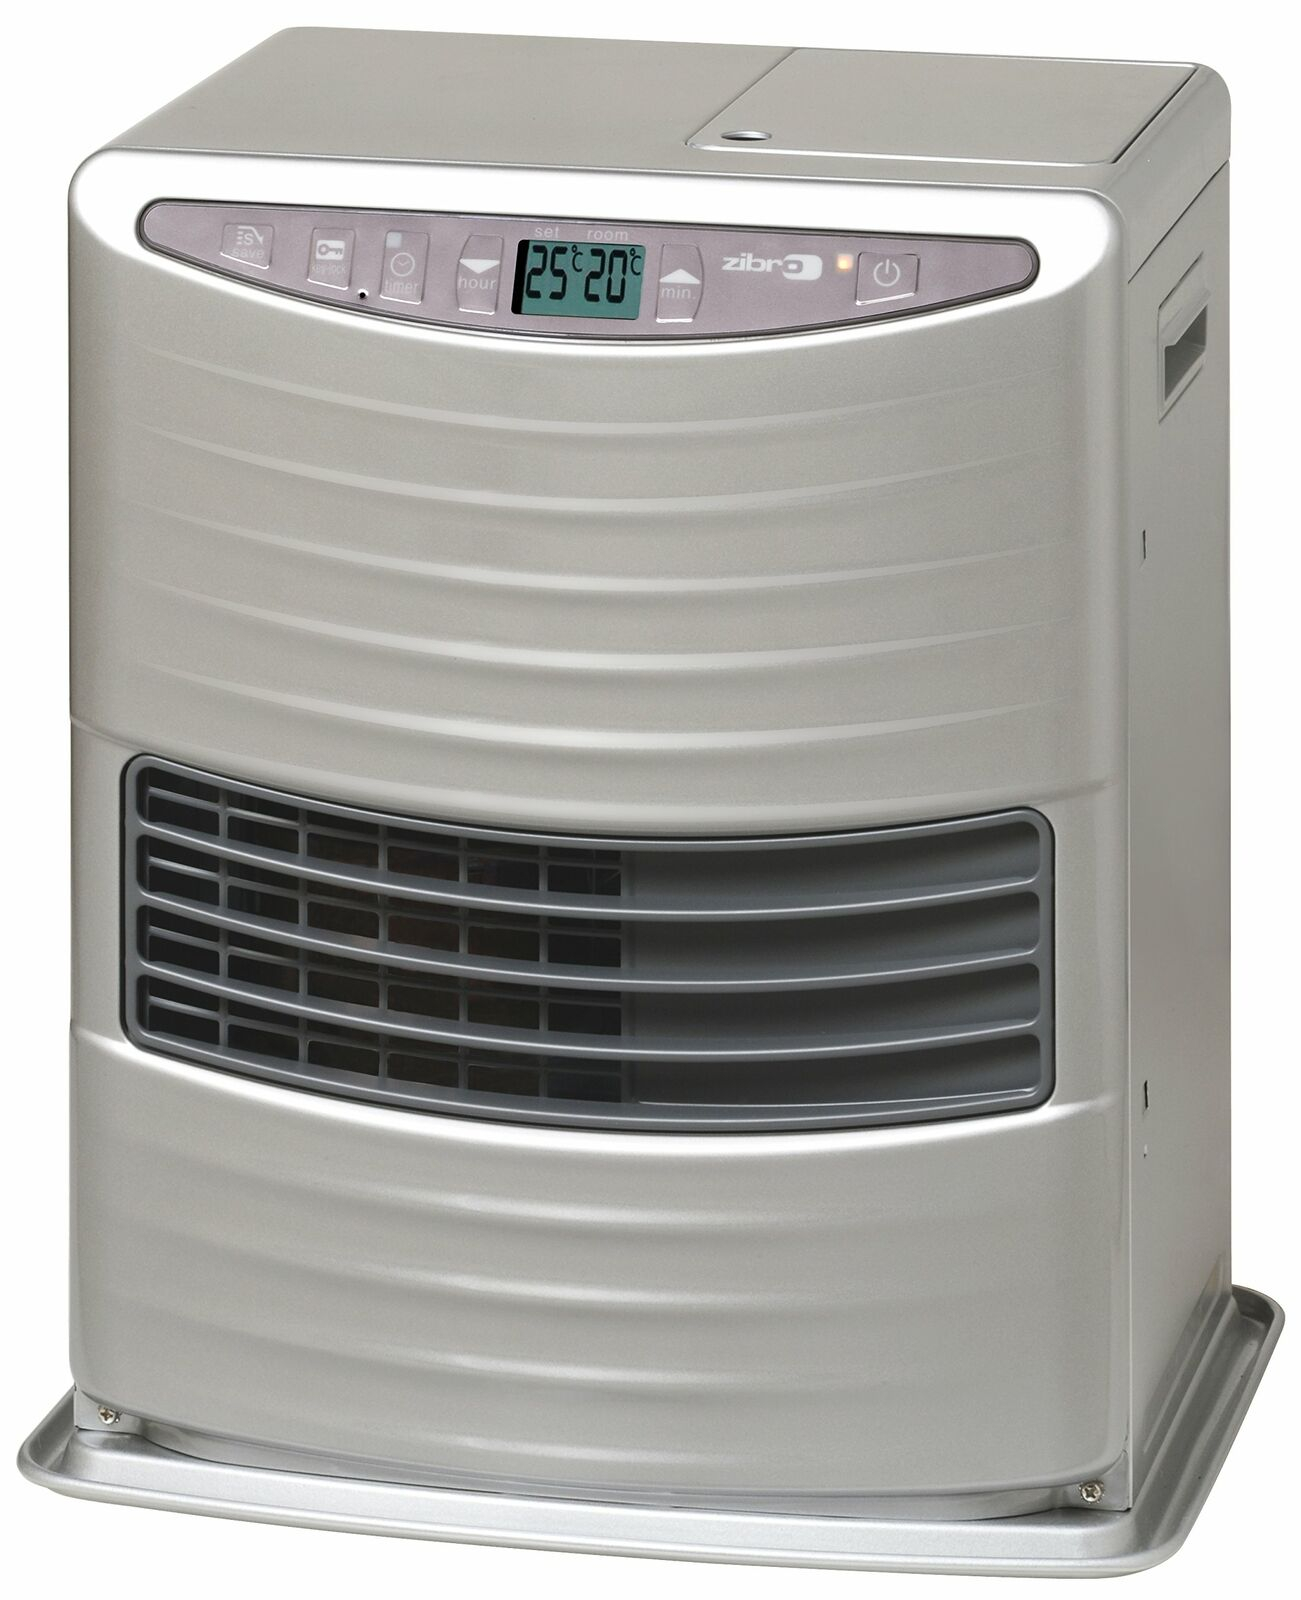 Home Heating Using Paraffin Inverter Heaters Electric pertaining to dimensions 1301 X 1600